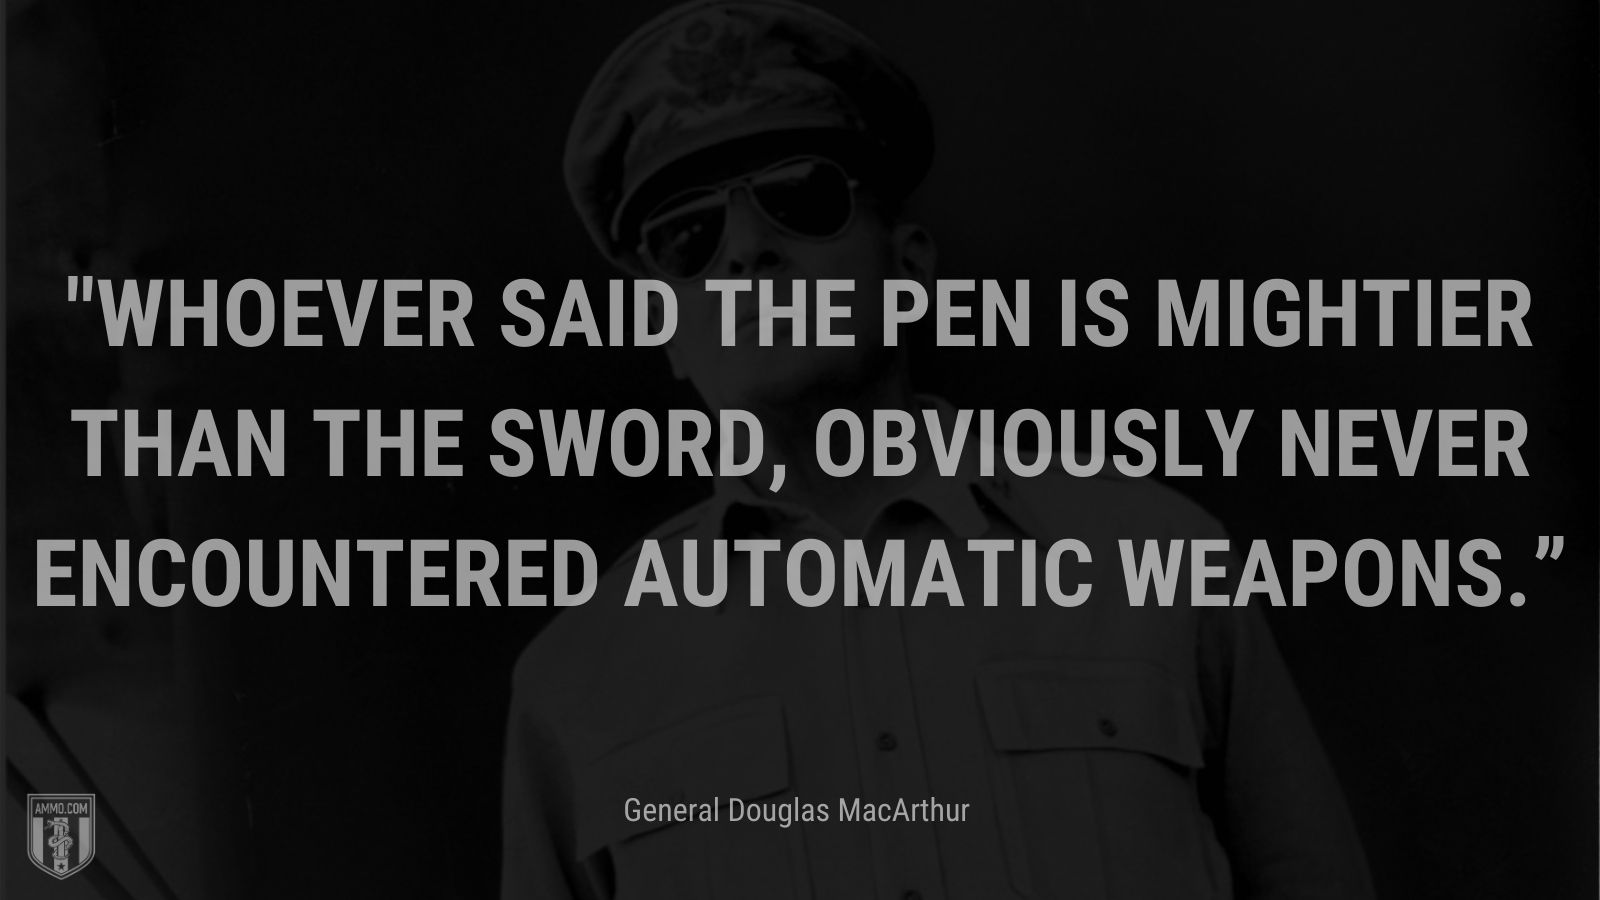 “Whoever said the pen is mightier than the sword, obviously never encountered automatic weapons.” - General Douglas MacArthur